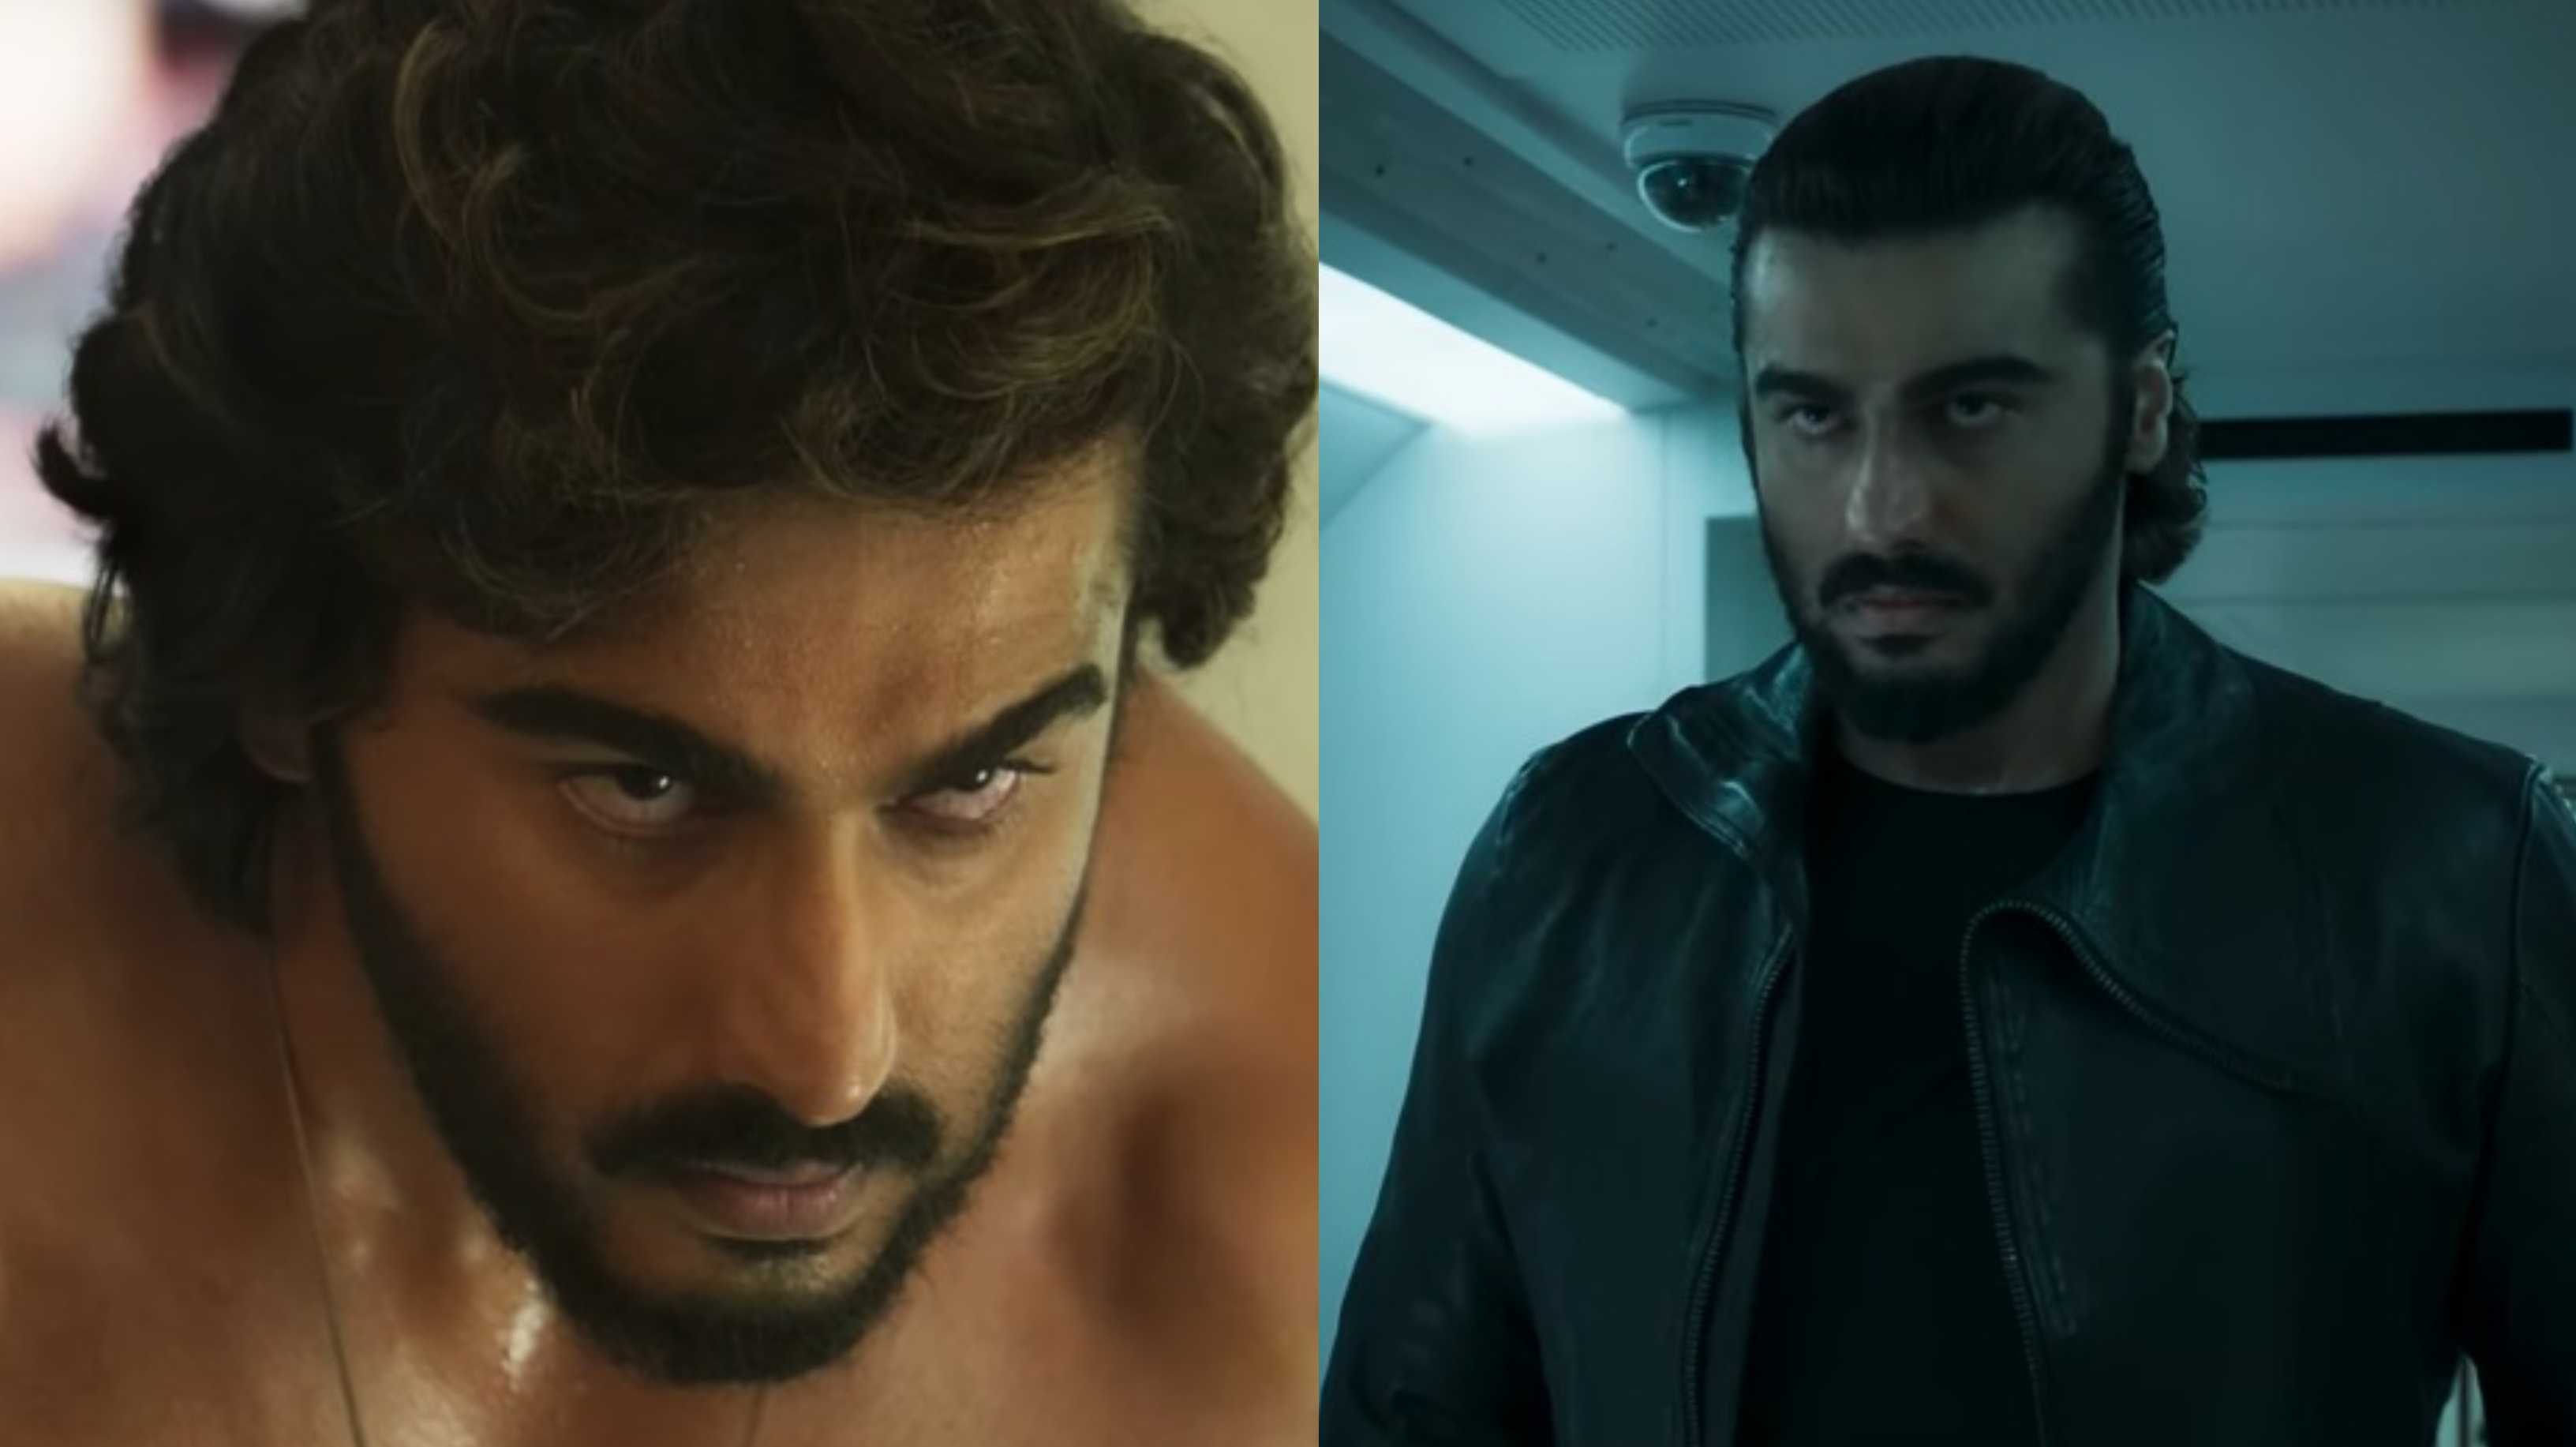 Arjun Kapoor on his transformation in Ek Villain Returns: ‘To everyone who trolled me, criticized me, I say thank you’